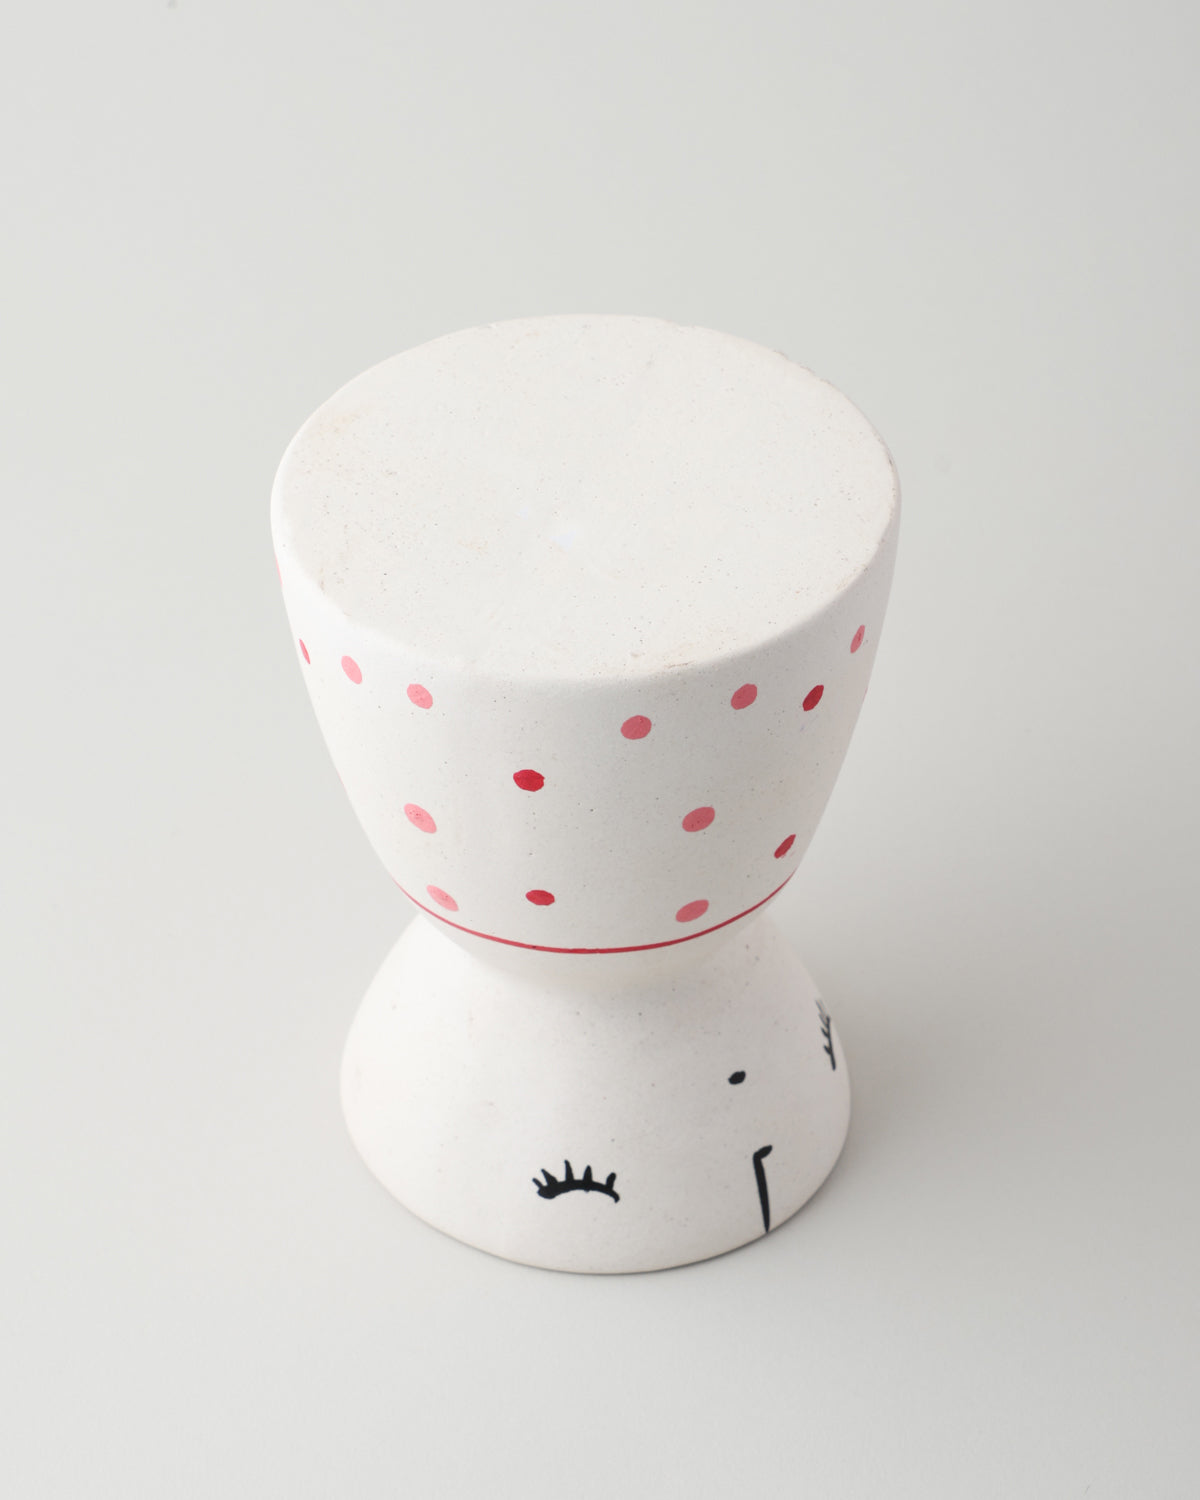 White Ceramic Flower Vase with Red & Pink Dots 5x4